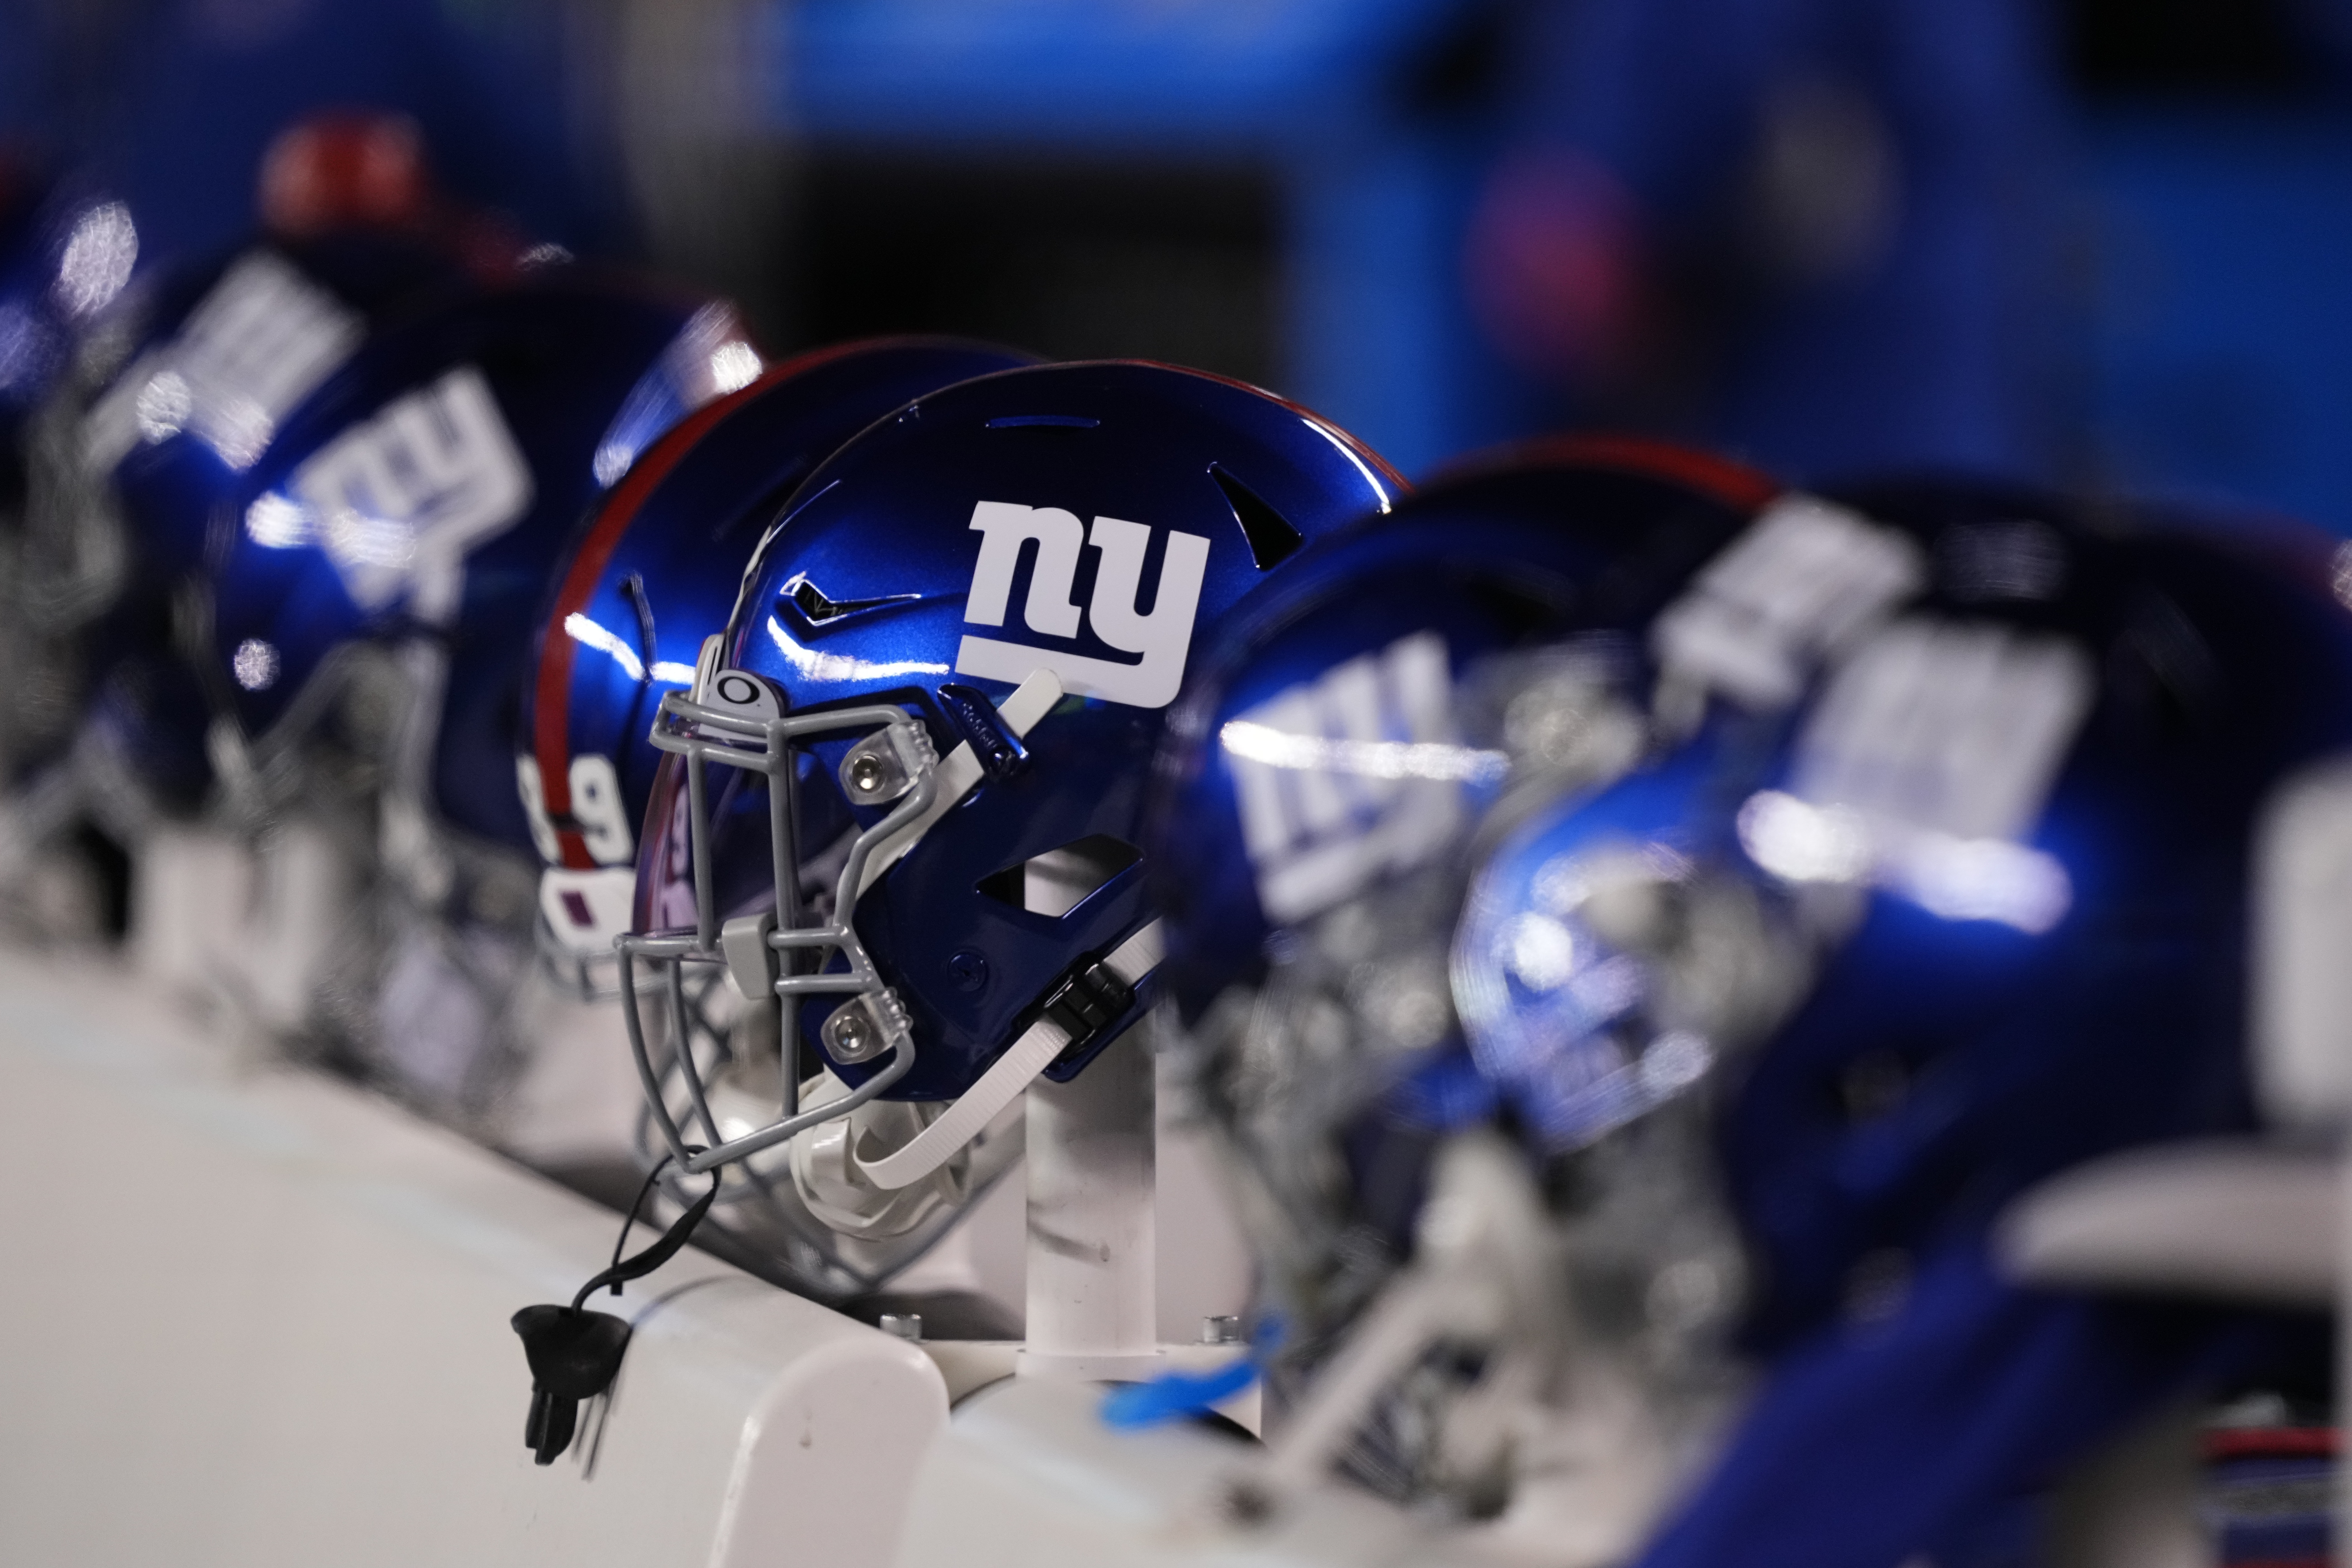 Giants WR could be traded before season, NFL analyst says